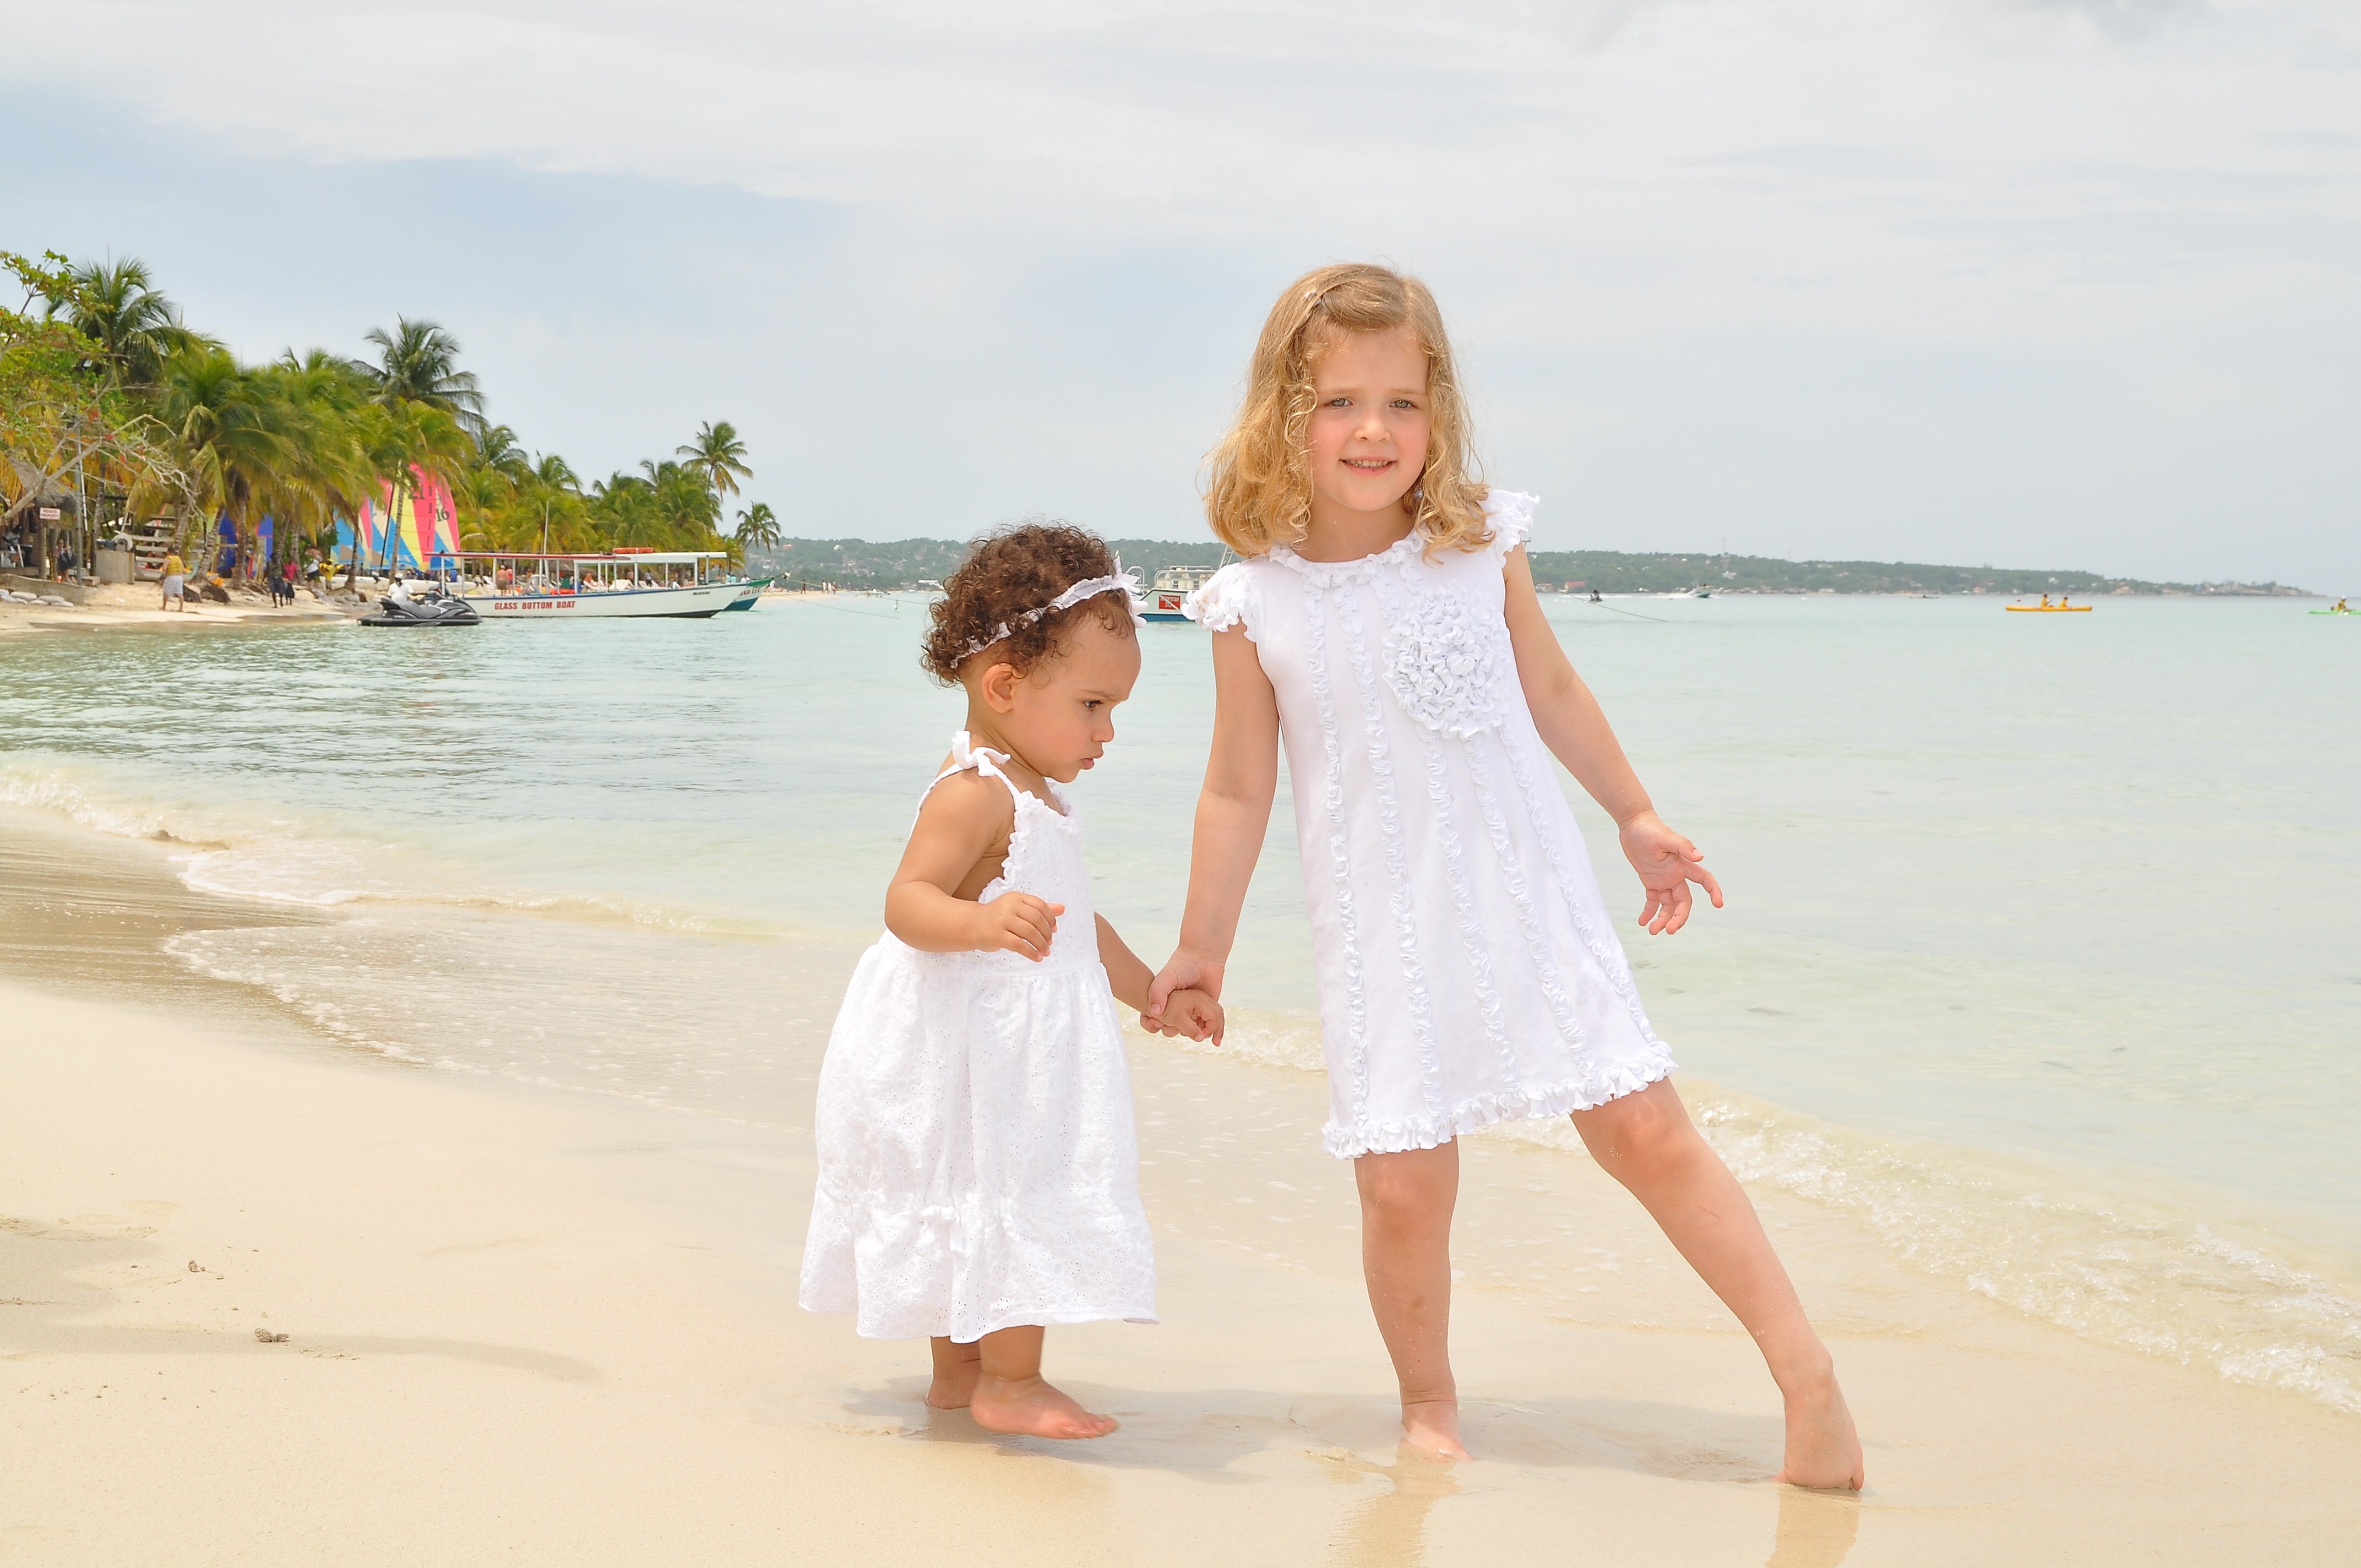 Young girls at the beach photo